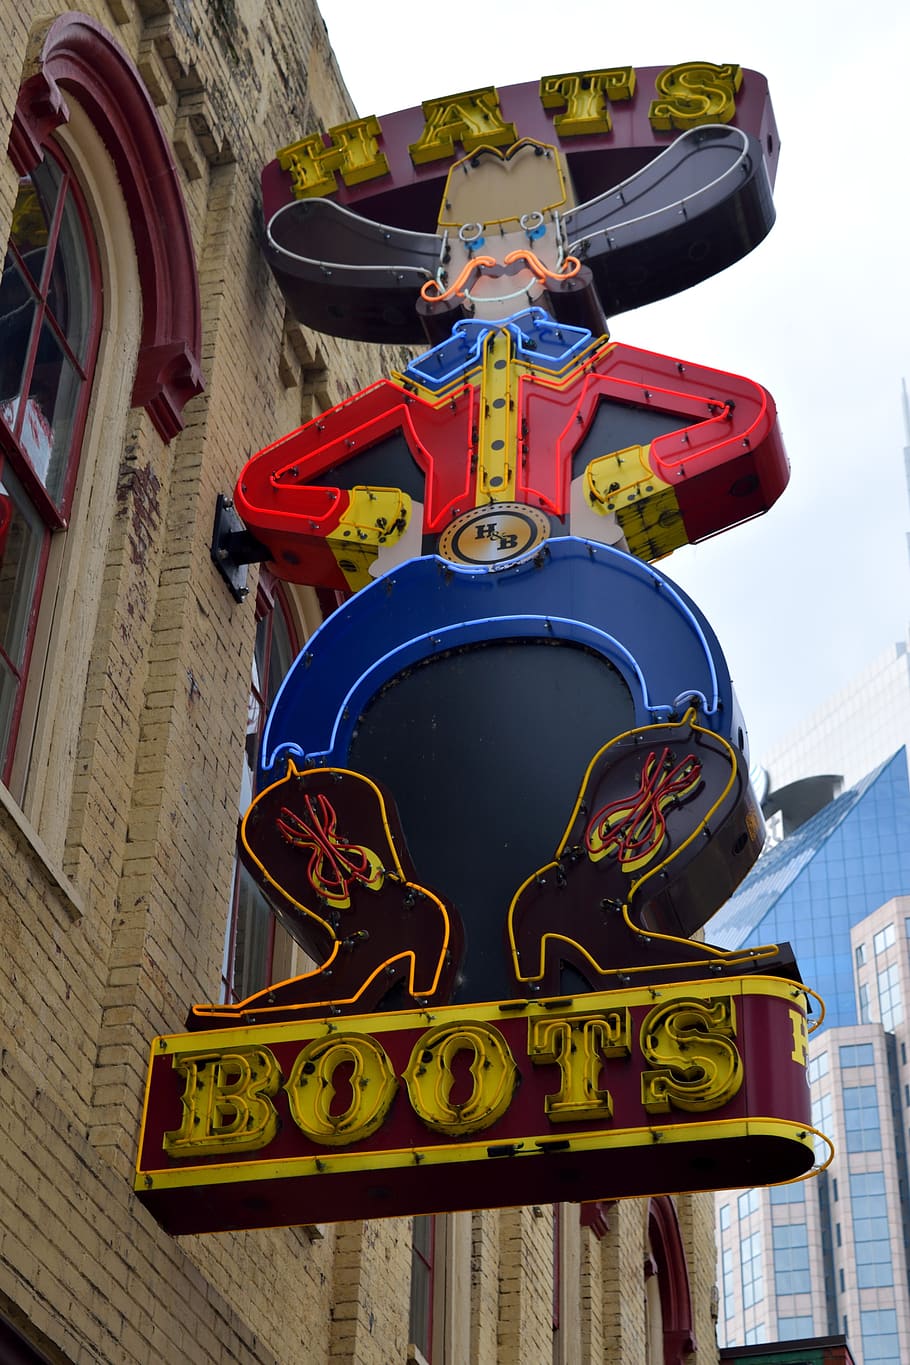 boots for sale, nashville tennessee, tourism, famous place, neon sign, sign, place, state, tennessee, travel